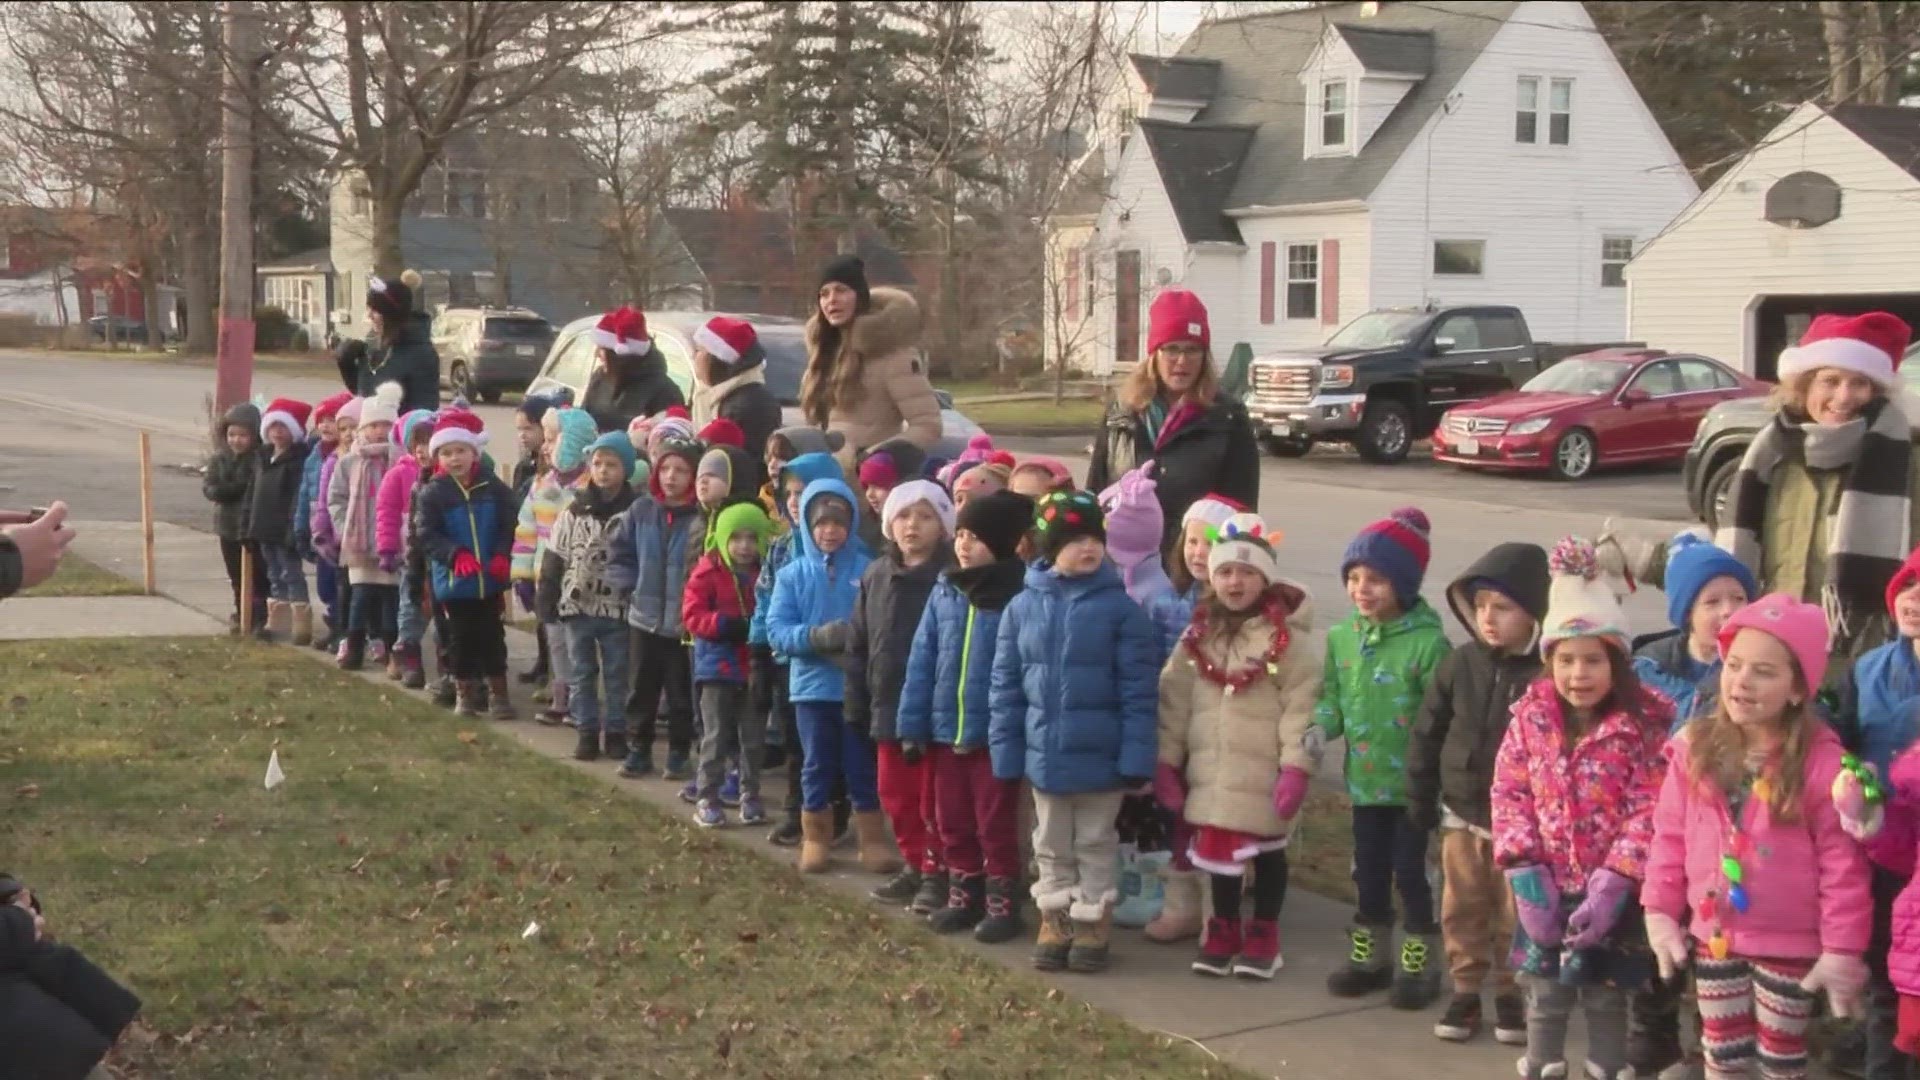 The kids made their way around the town, singing to community members and inside businesses.